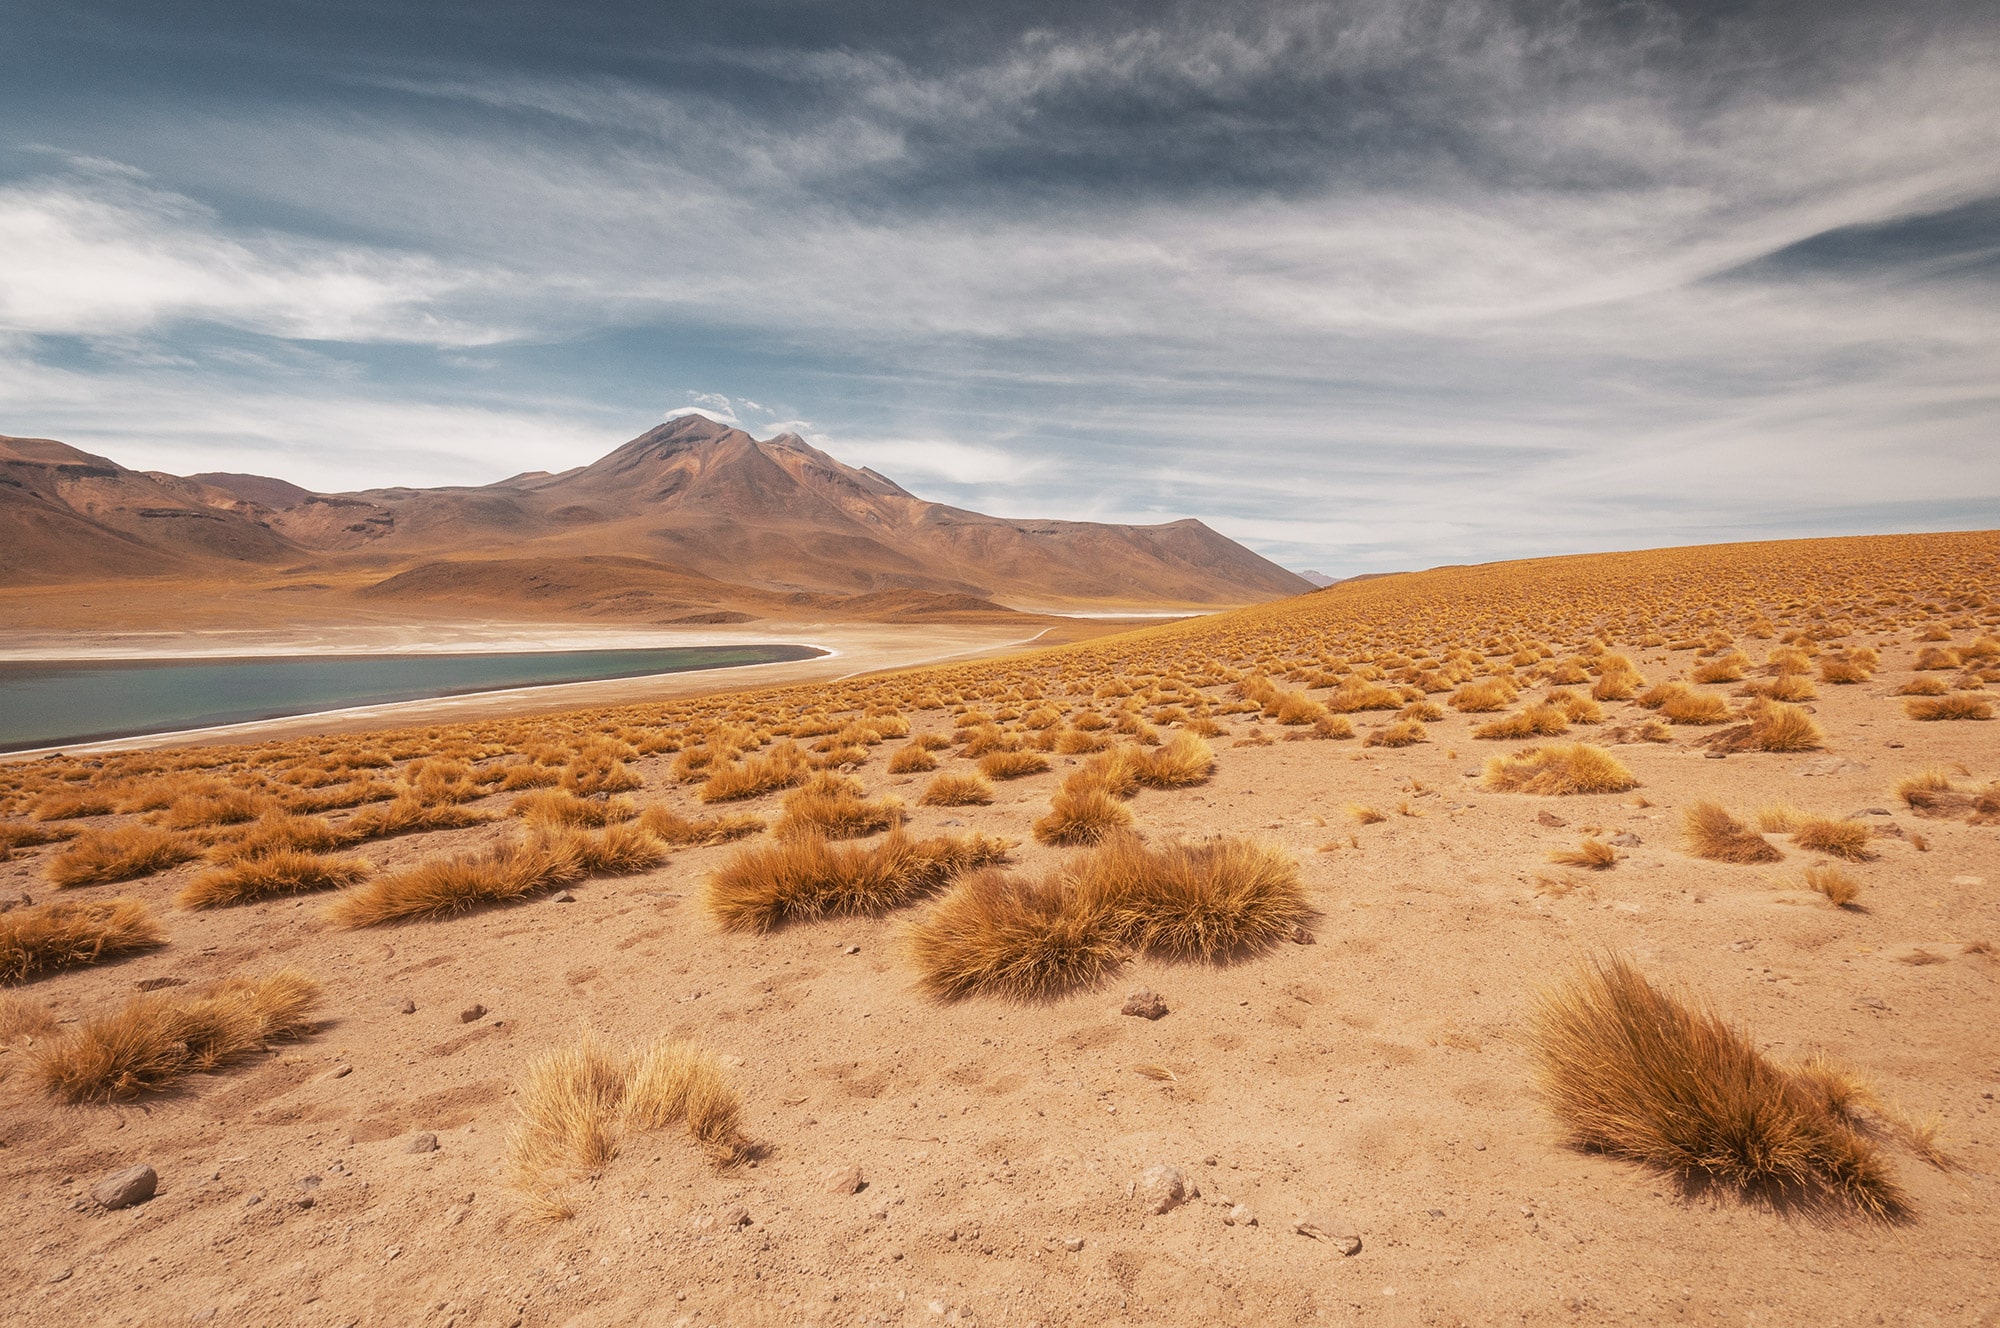 Explore the breathtaking beauty of the Miscanti Lagoon in Chile's Atacama Desert, captured by acclaimed Swiss artist Jennifer Esseiva using her Nikon D300 camera. This stunning photograph showcases the mesmerizing landscapes near San Pedro de Atacama, offering a vivid portrayal of the unique charm and natural wonders found in the heart of the Atacama. Immerse yourself in the vivid colors and captivating scenery through Esseiva's lens, as she skillfully brings this pristine location to life. A visual masterpiece capturing the essence of the Miscanti Lagoon and the surrounding desert oasis.